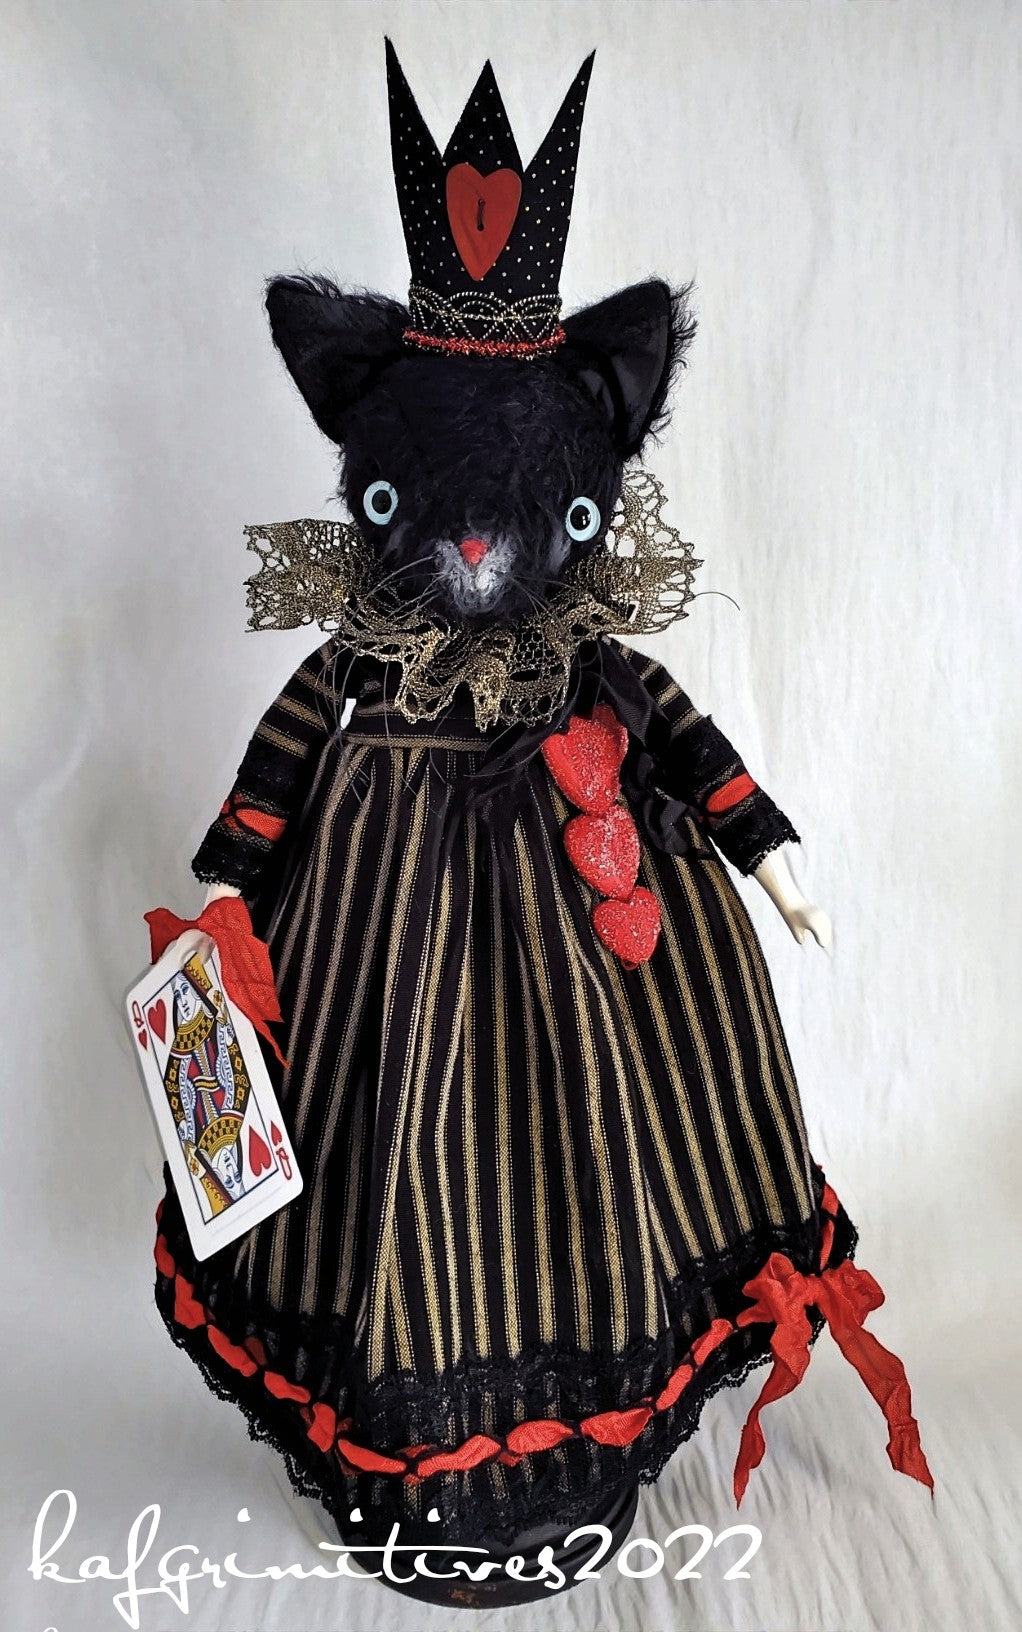 Lorna Lovelorn the Queen Cat of Hearts